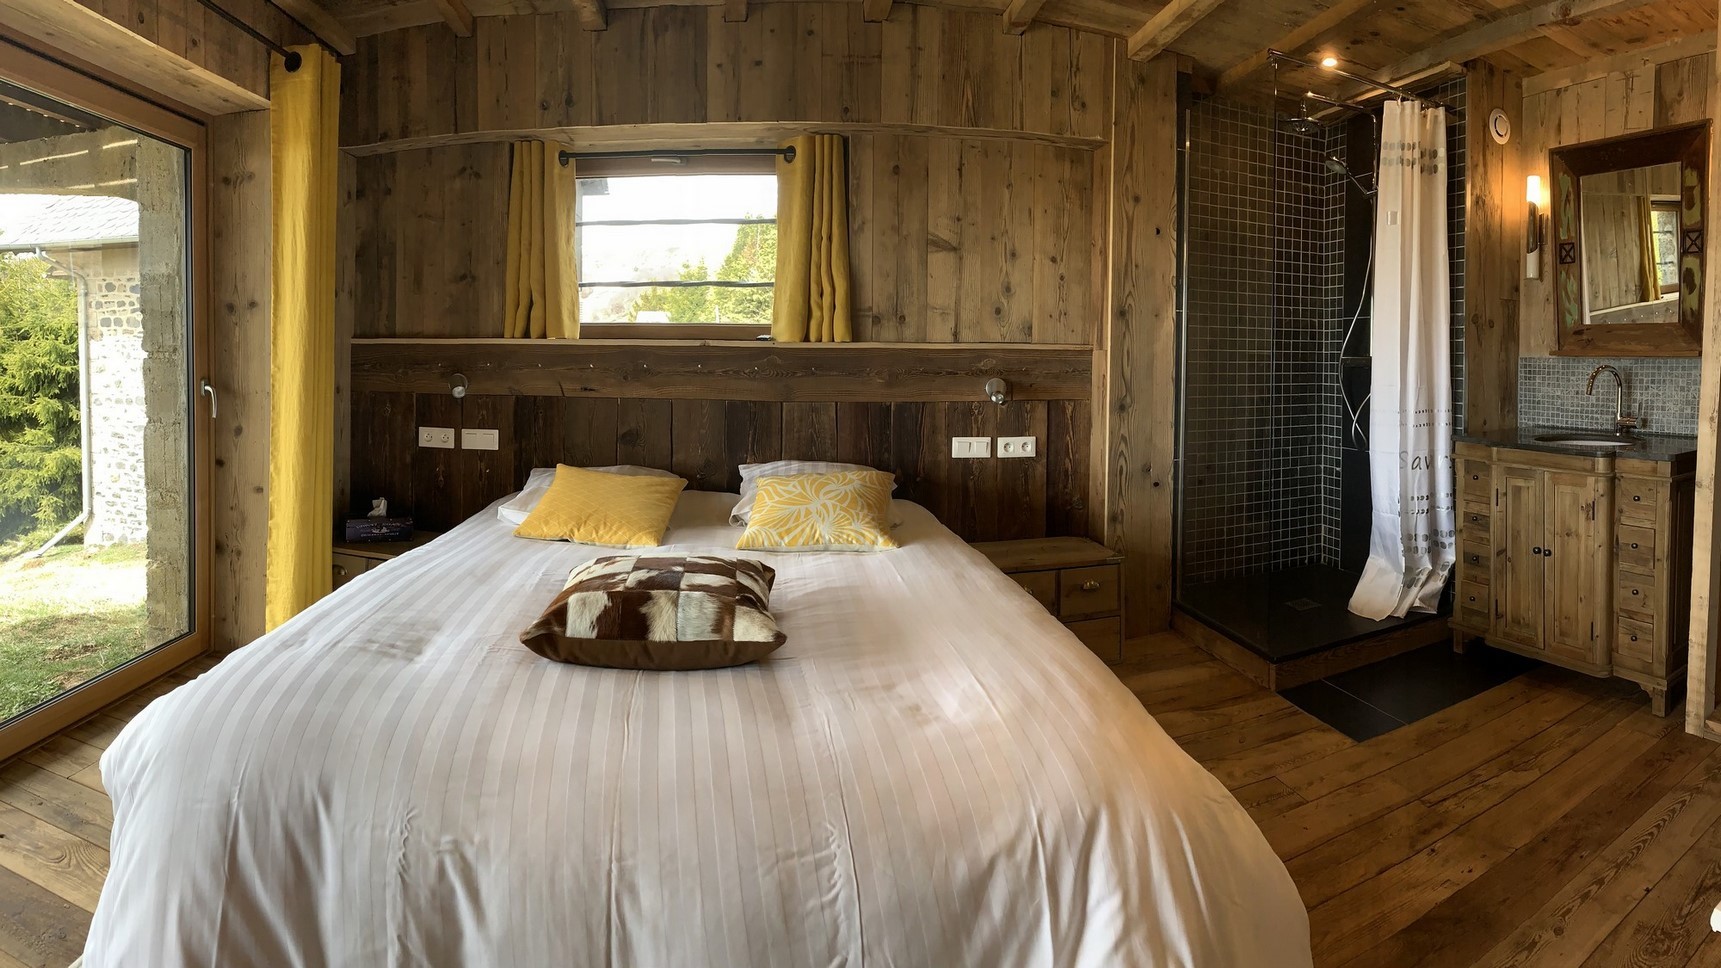 Super Besse chalet, Anorak chalet, waterfall bedroom and its headboard